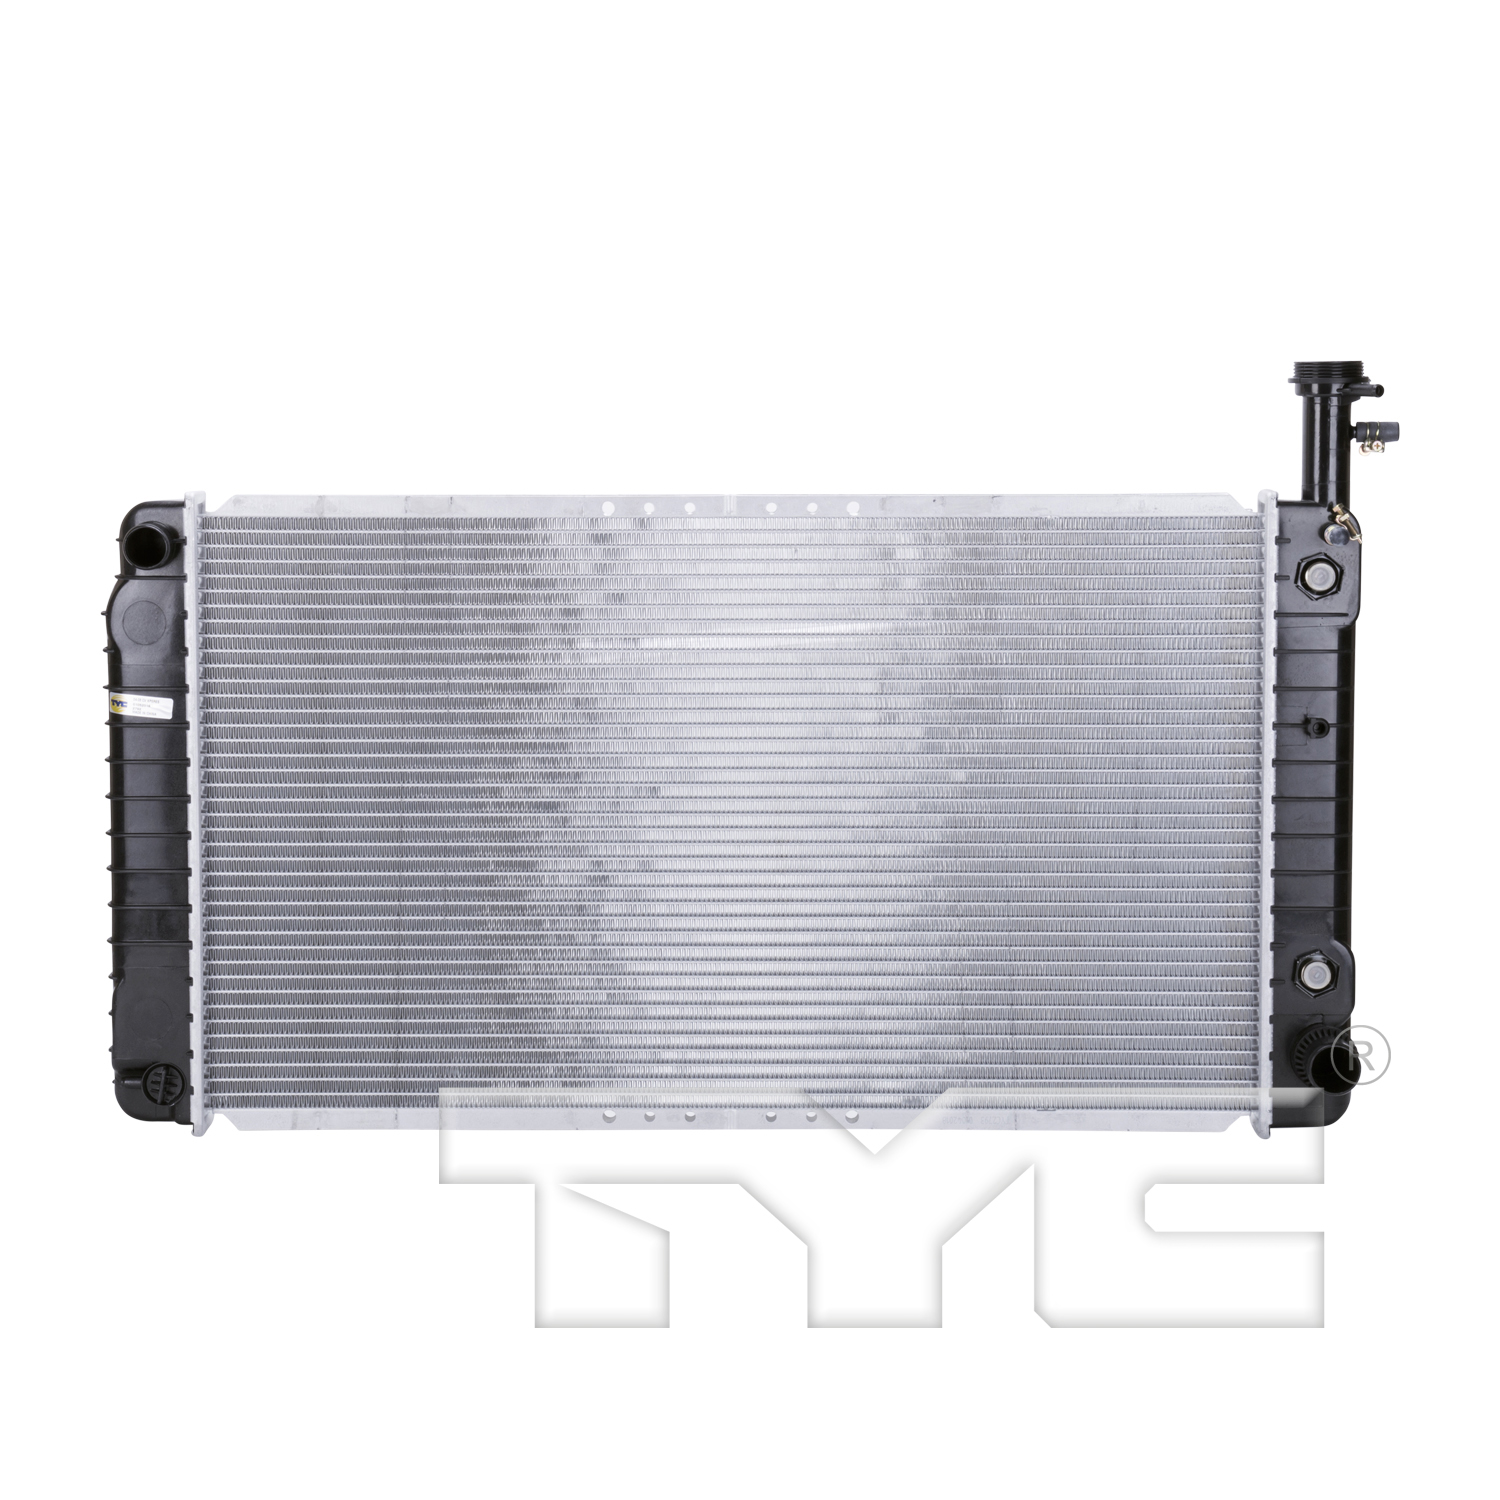 Aftermarket RADIATORS for CHEVROLET - EXPRESS 3500, EXPRESS 3500,04-14,Radiator assembly